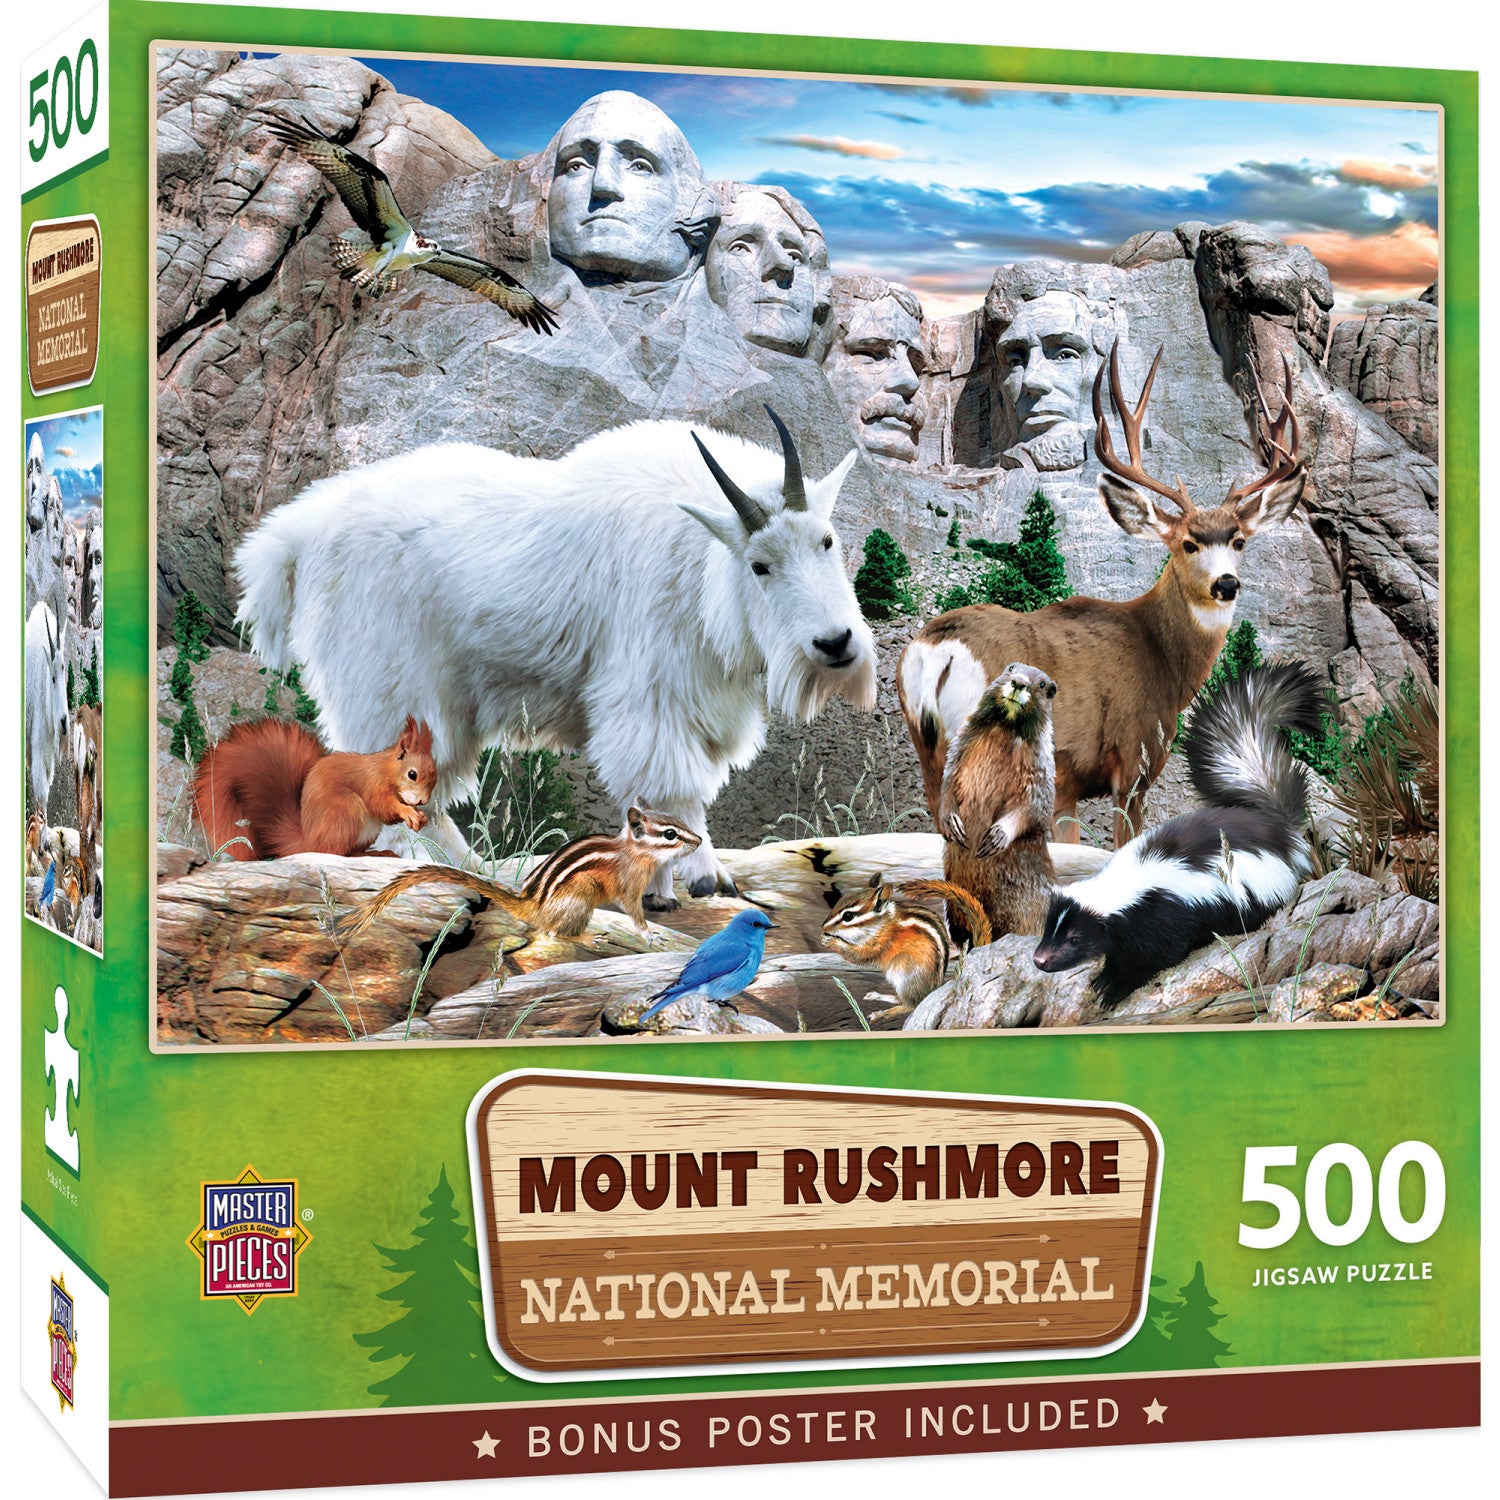 Mount Rushmore National Memorial 500 Piece Jigsaw Puzzle